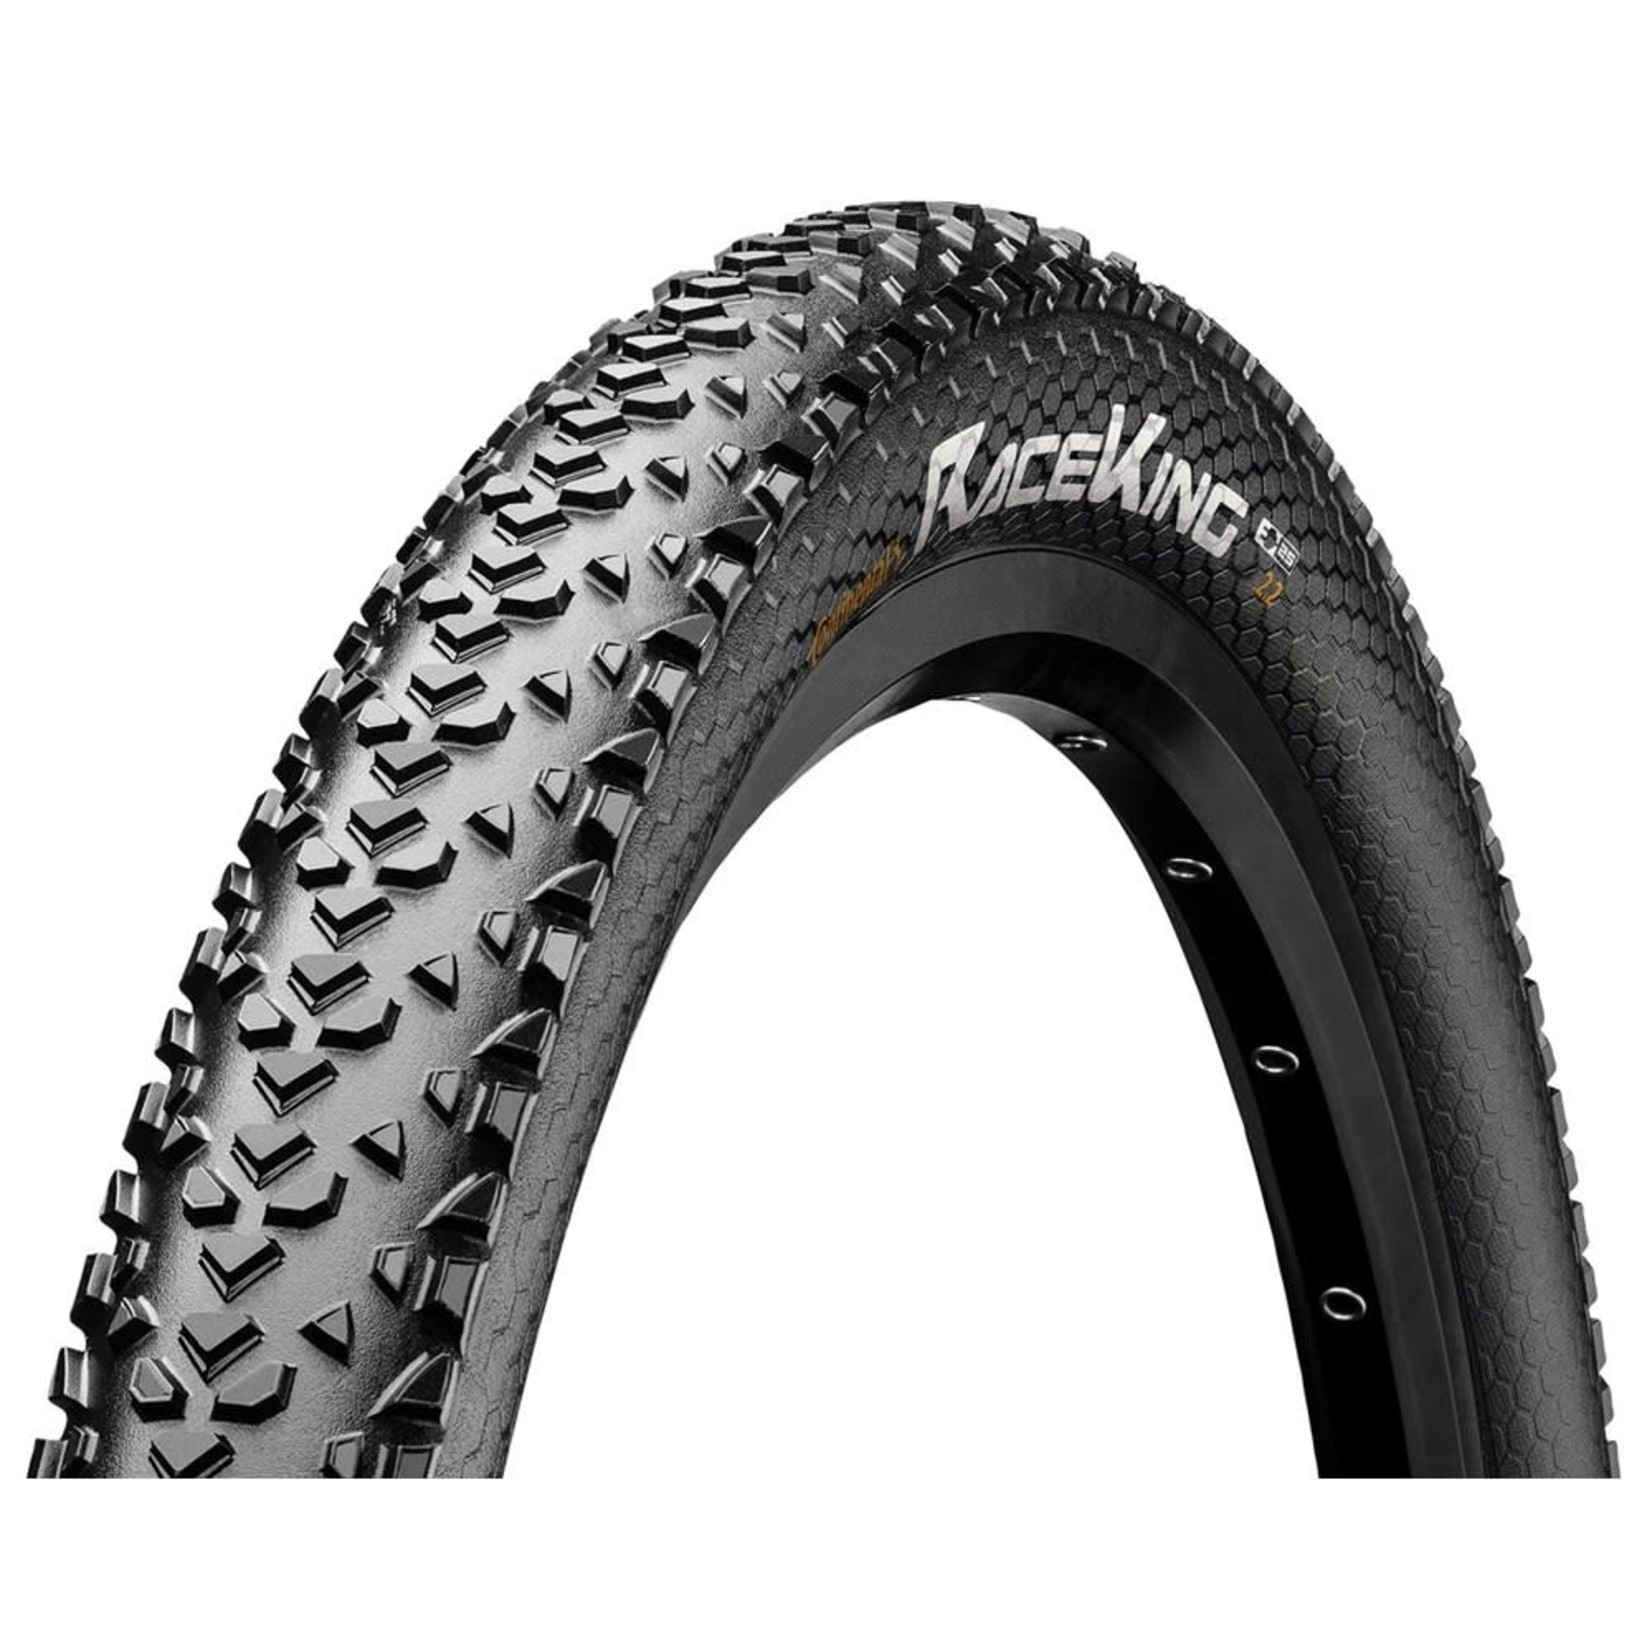 Continental XC/Enduro Tires Wire Bead Race King 26 x 2.2